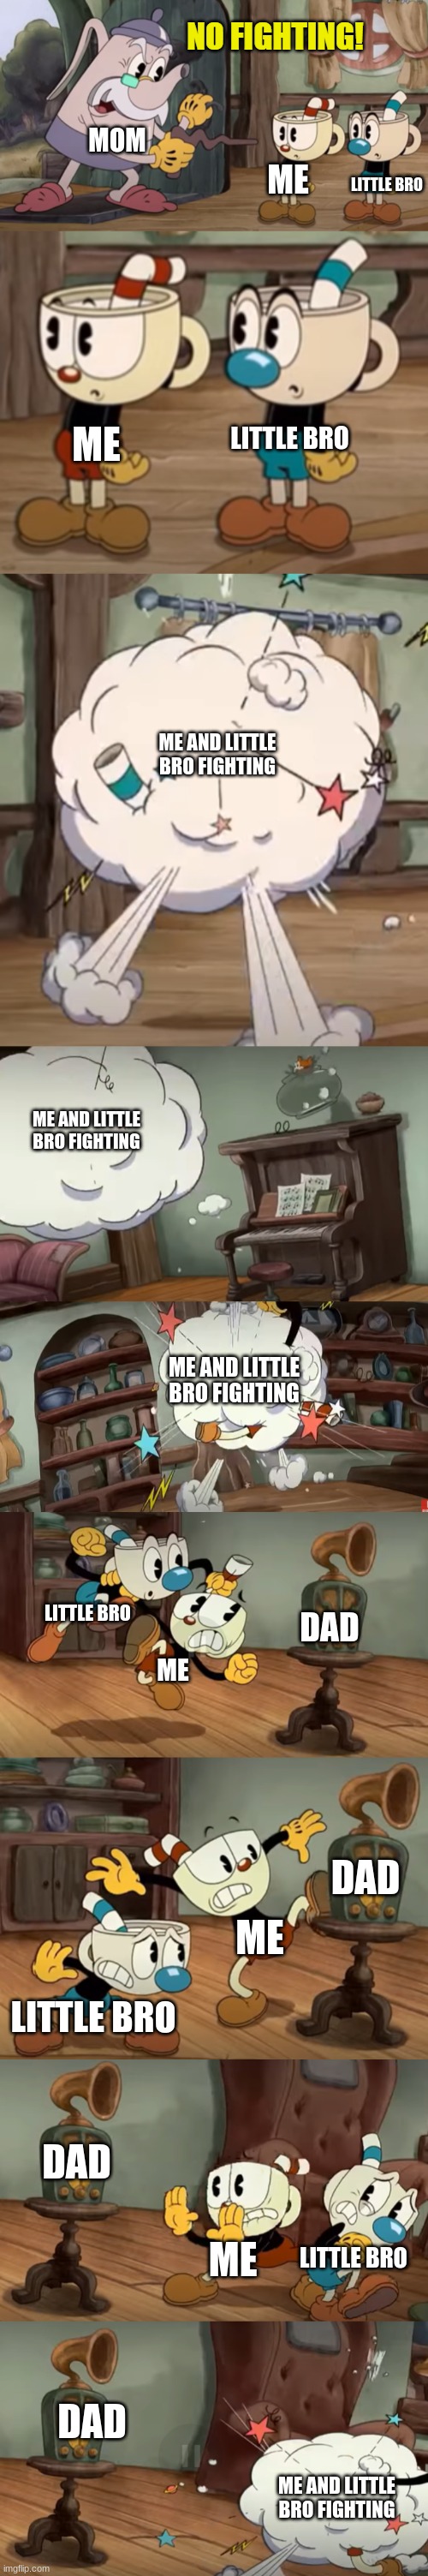 story of my life | MOM; LITTLE BRO; ME; LITTLE BRO; ME; ME AND LITTLE BRO FIGHTING; ME AND LITTLE BRO FIGHTING; ME AND LITTLE BRO FIGHTING; LITTLE BRO; DAD; ME; DAD; ME; LITTLE BRO; DAD; ME; LITTLE BRO; DAD; ME AND LITTLE BRO FIGHTING | image tagged in cuphead show no fighting | made w/ Imgflip meme maker